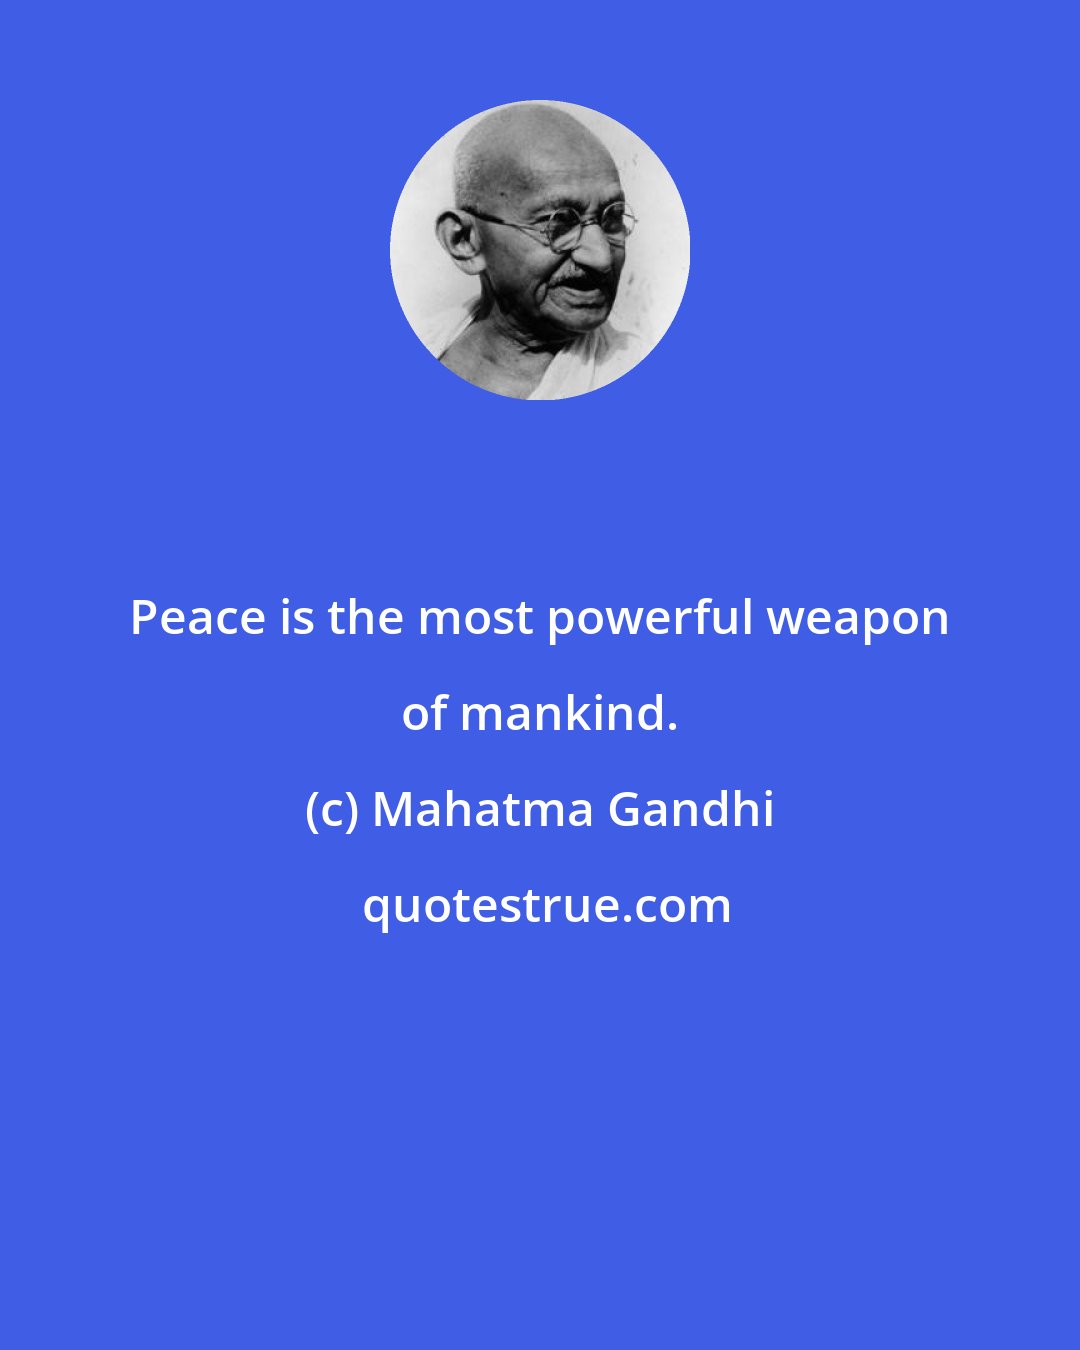 Mahatma Gandhi: Peace is the most powerful weapon of mankind.